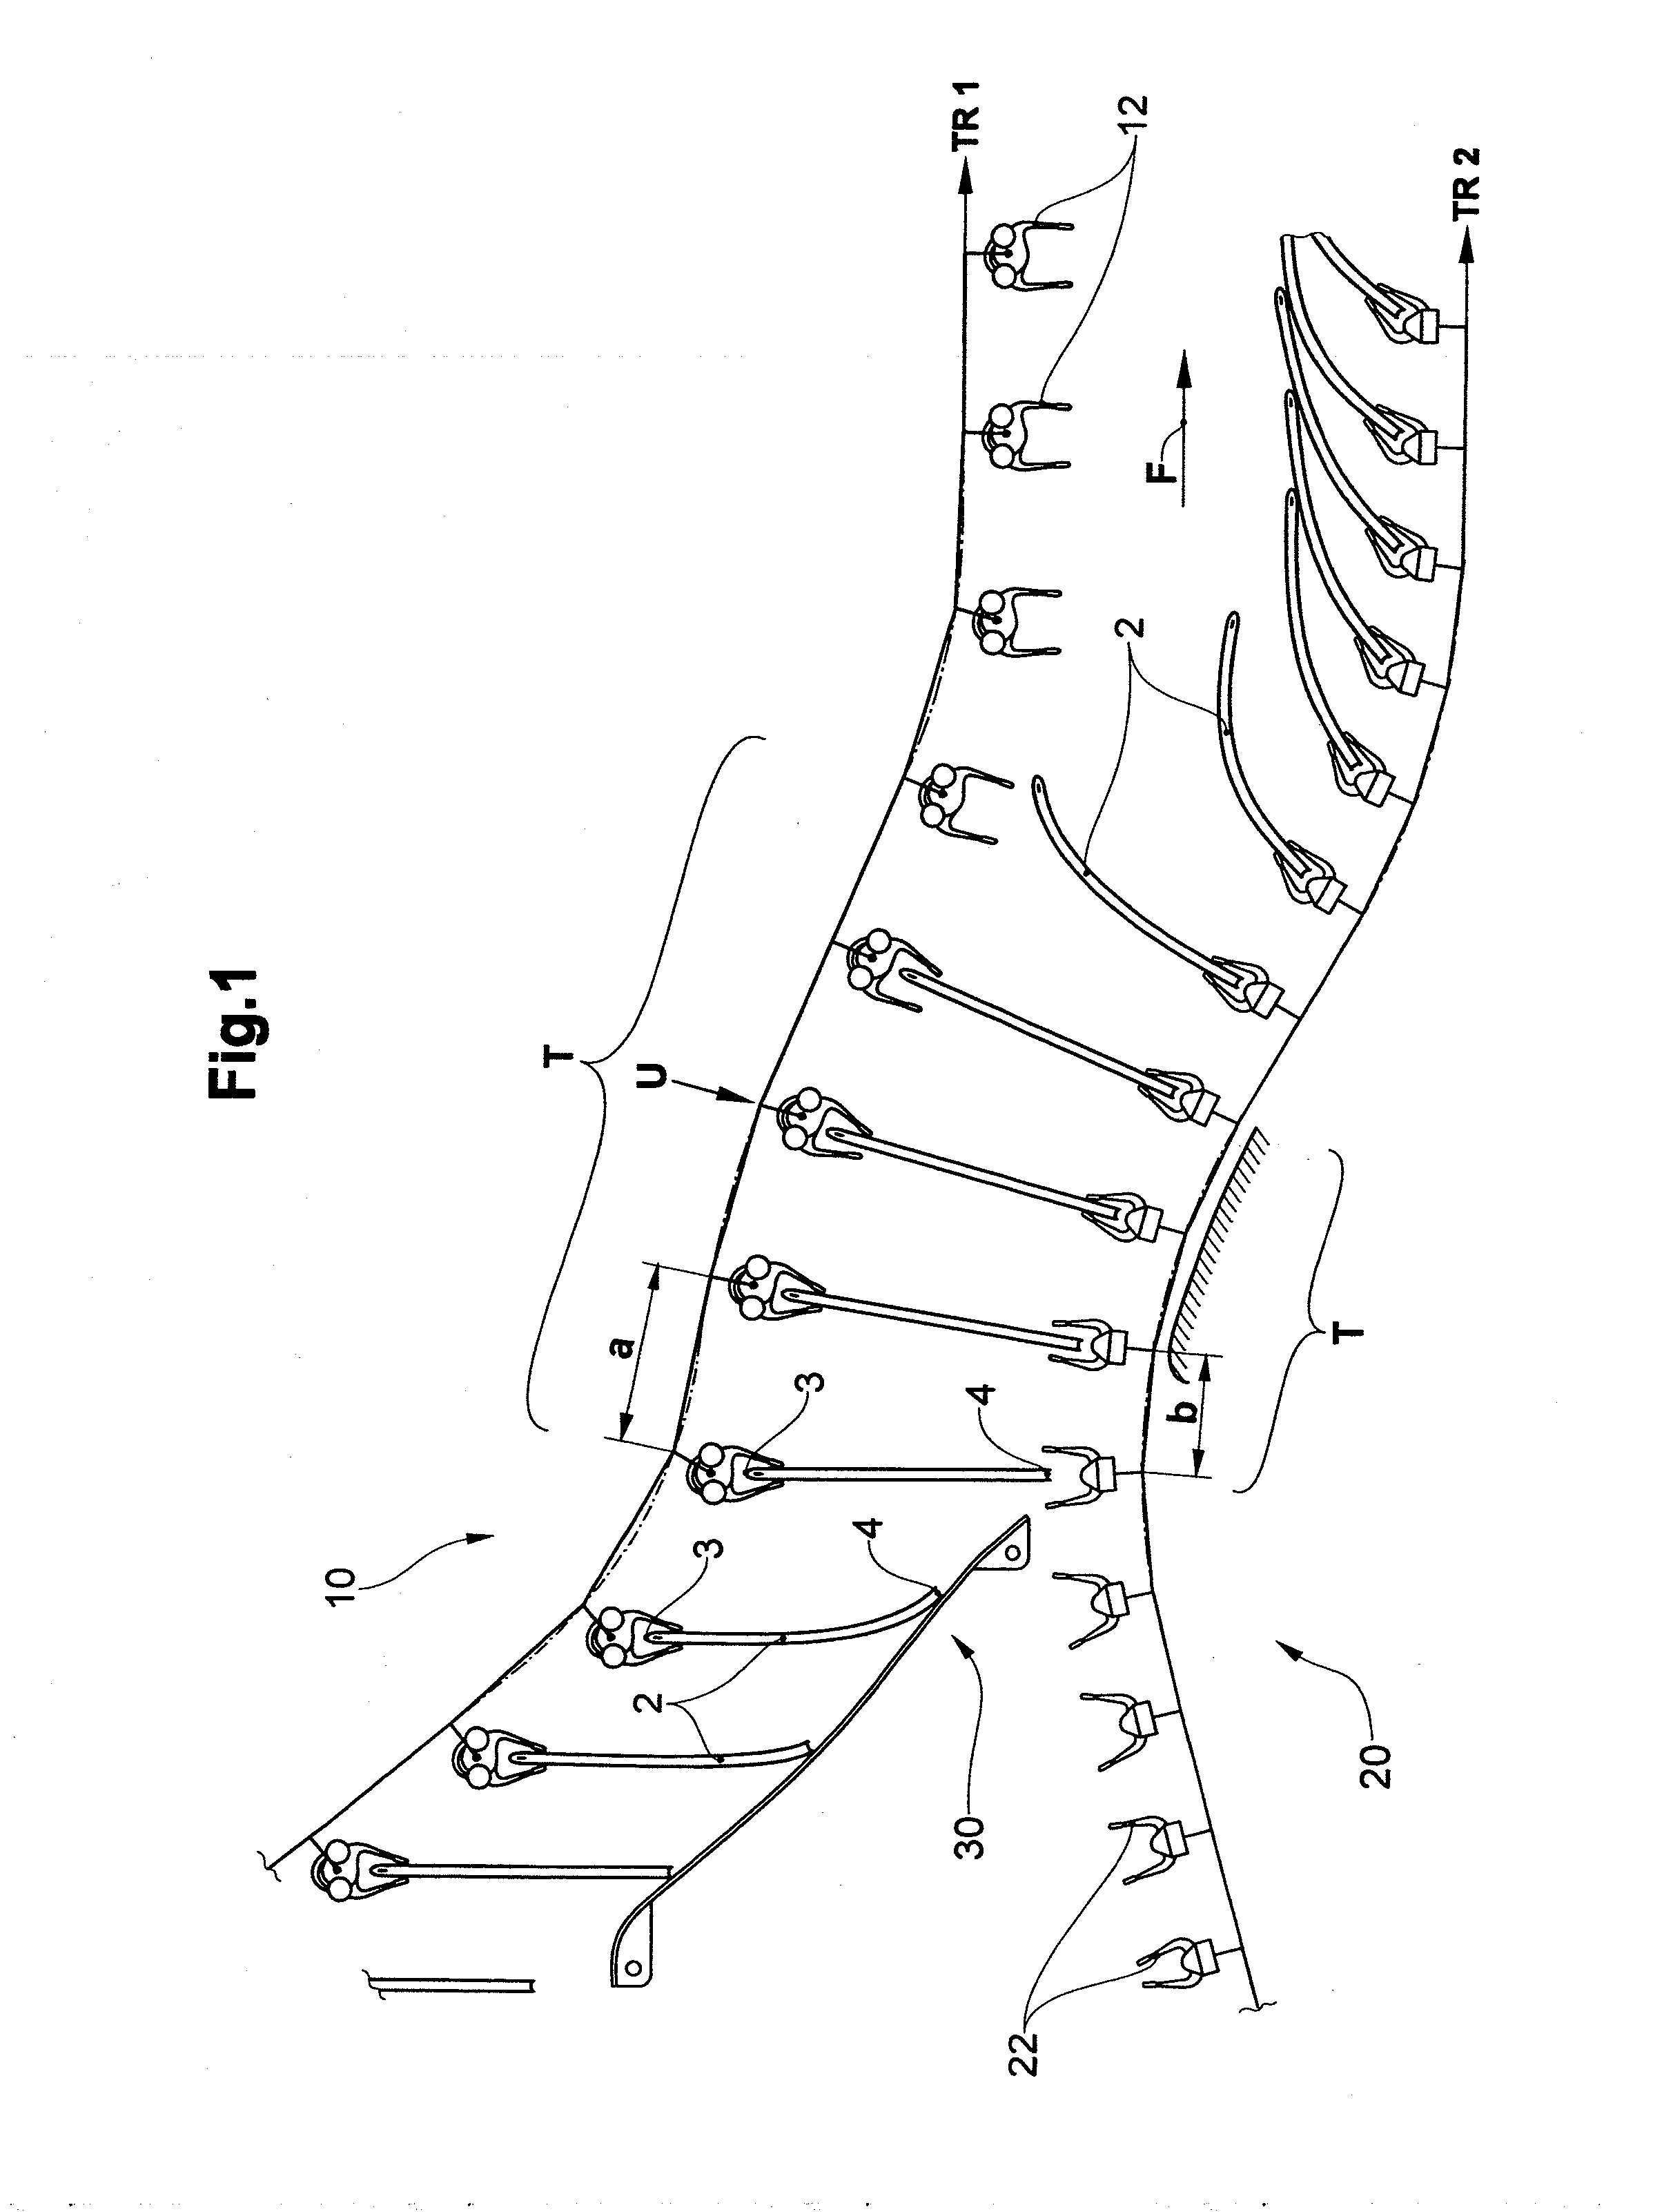 Device and method for the transfer of flexible flat articles